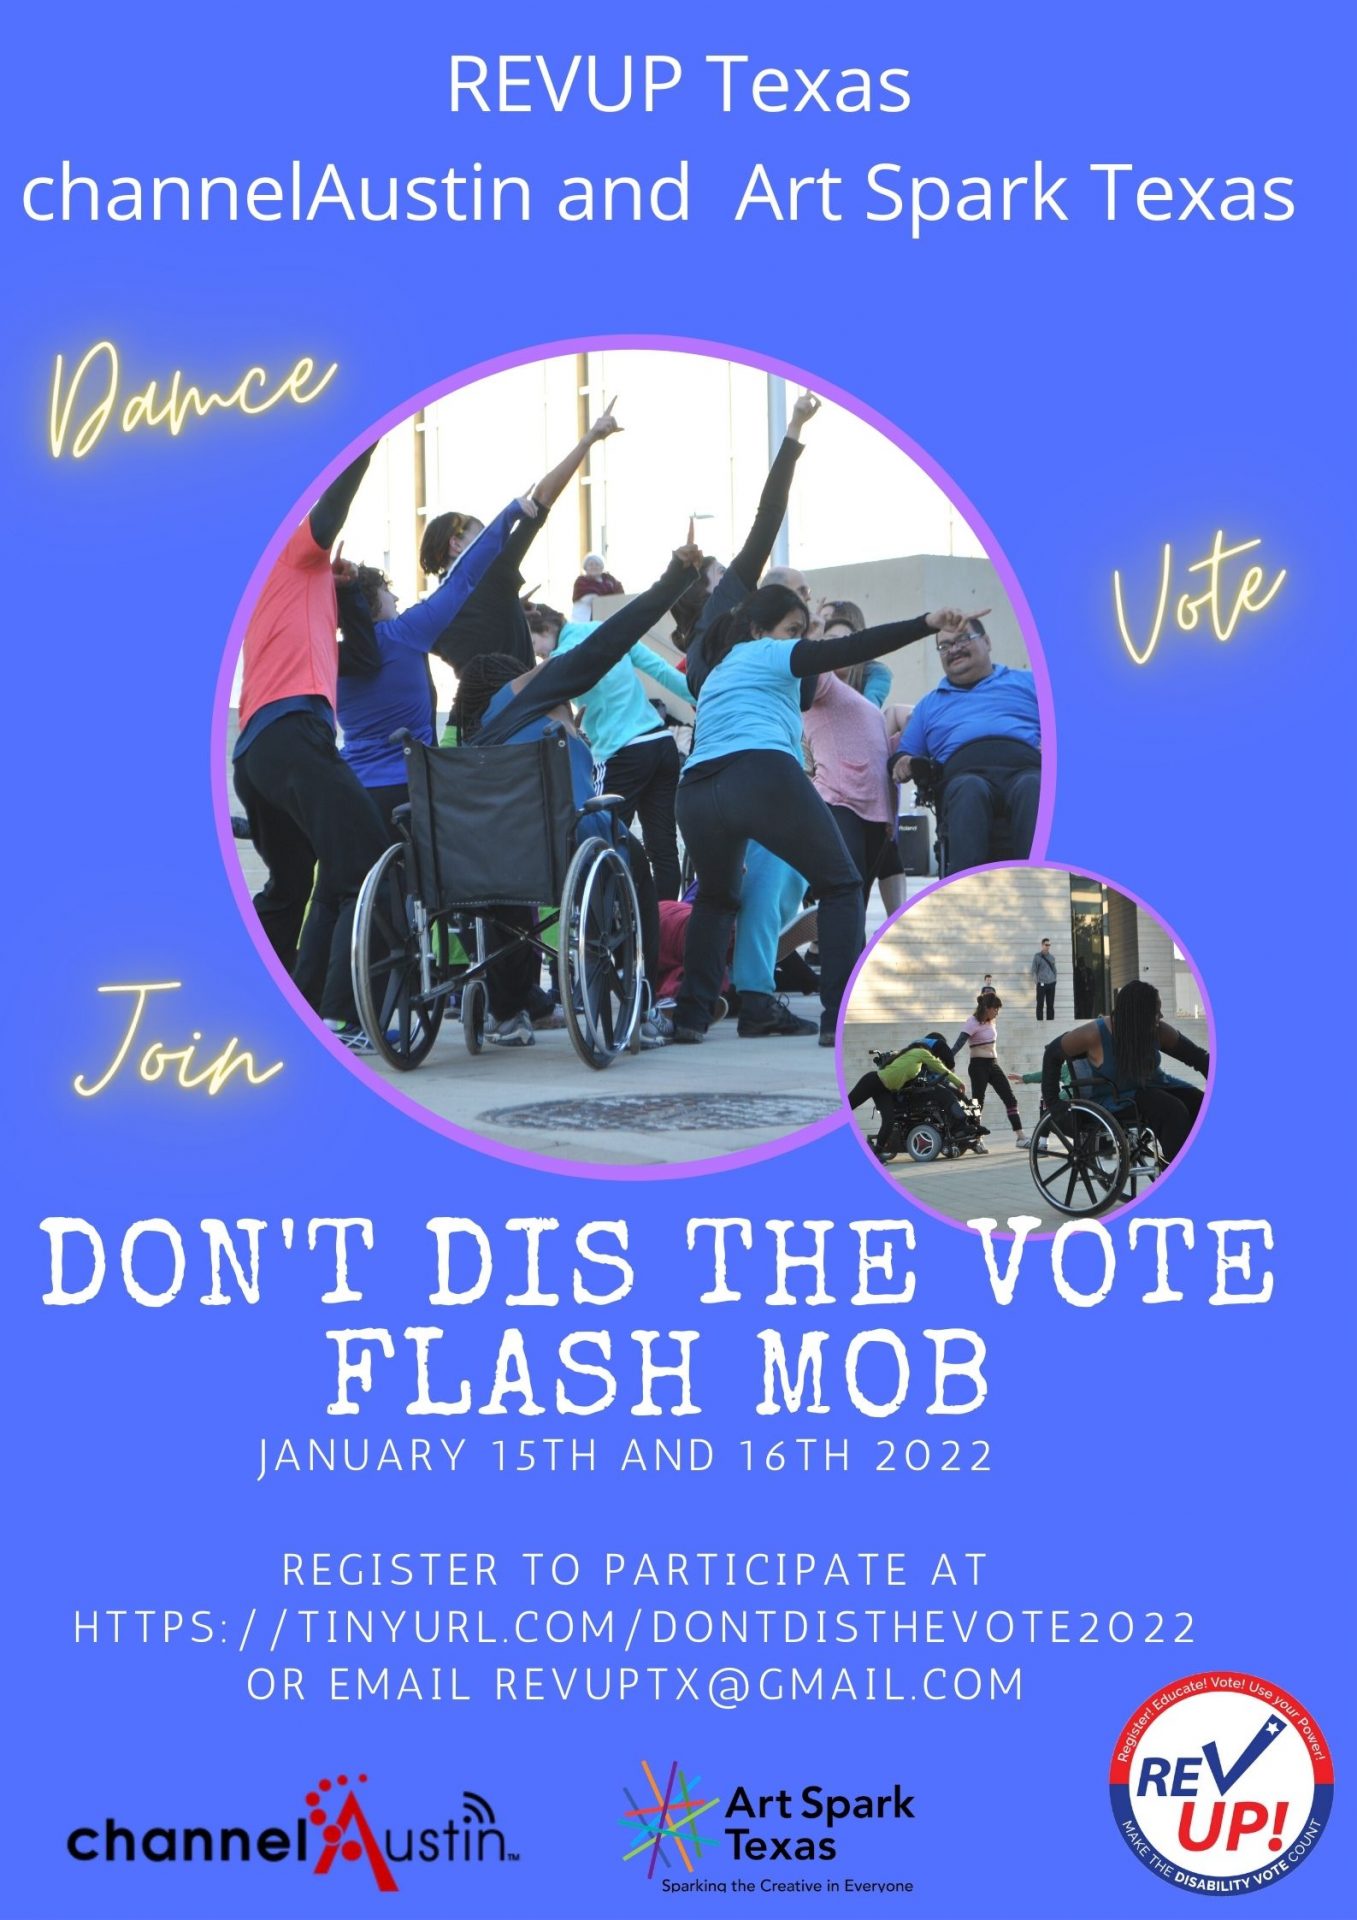 A poster promoting the Don't Dis The Vote flash mob for the 15th and 16th of January. Centered on the poster is a circular cropped photograph of a crowd of people with diverse abilities excitedly stiking a pose with their fingers pointing to the sky.